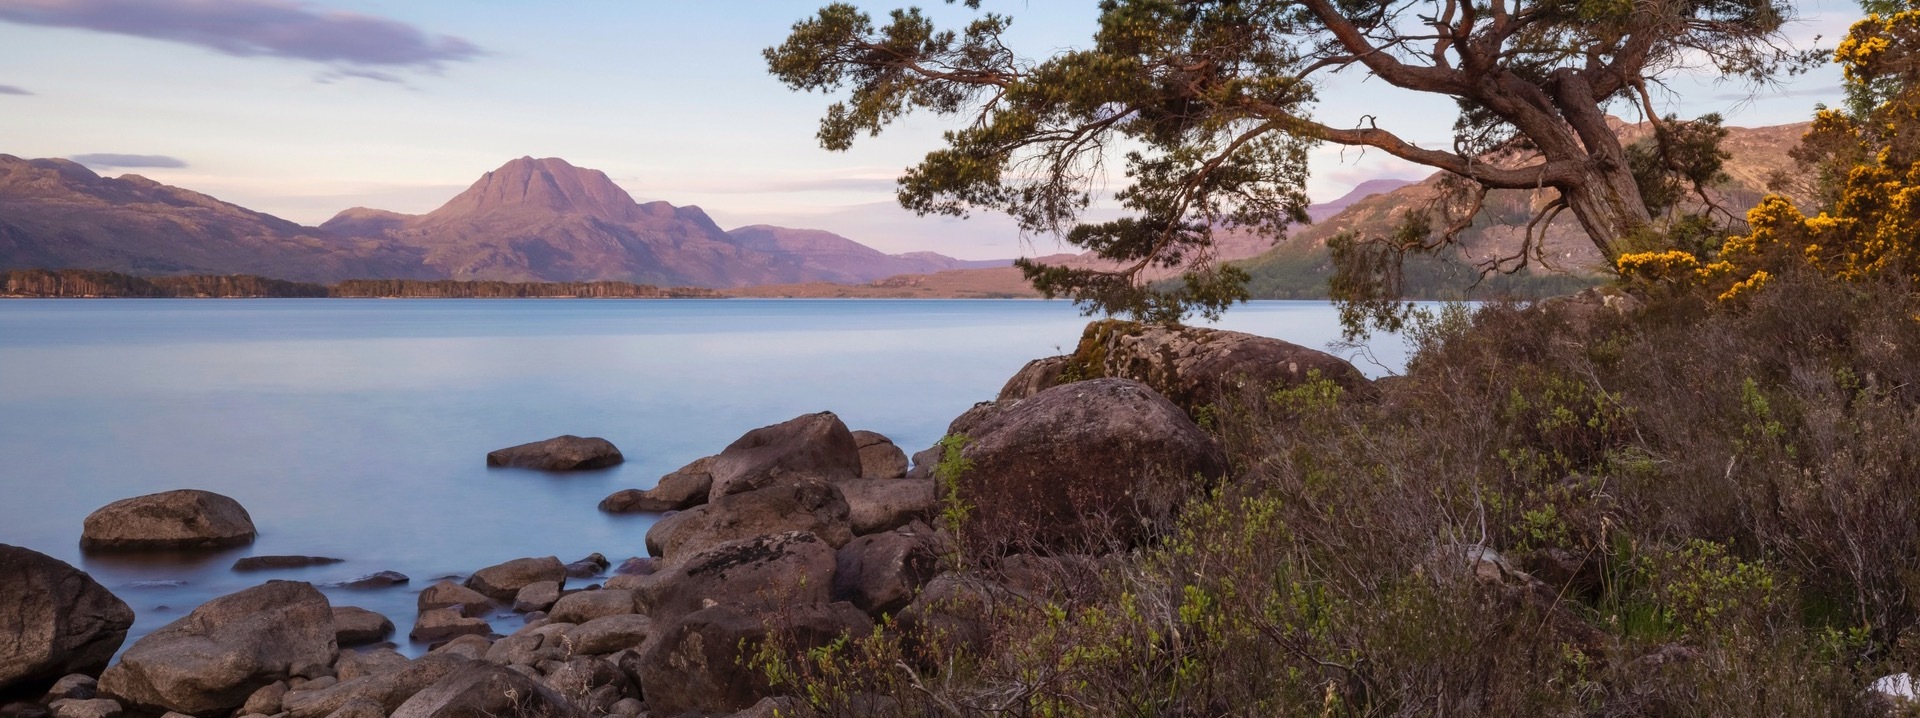 Looking past a tree and rocky shore, over Loch Maree, with the mountain Slioch in the background